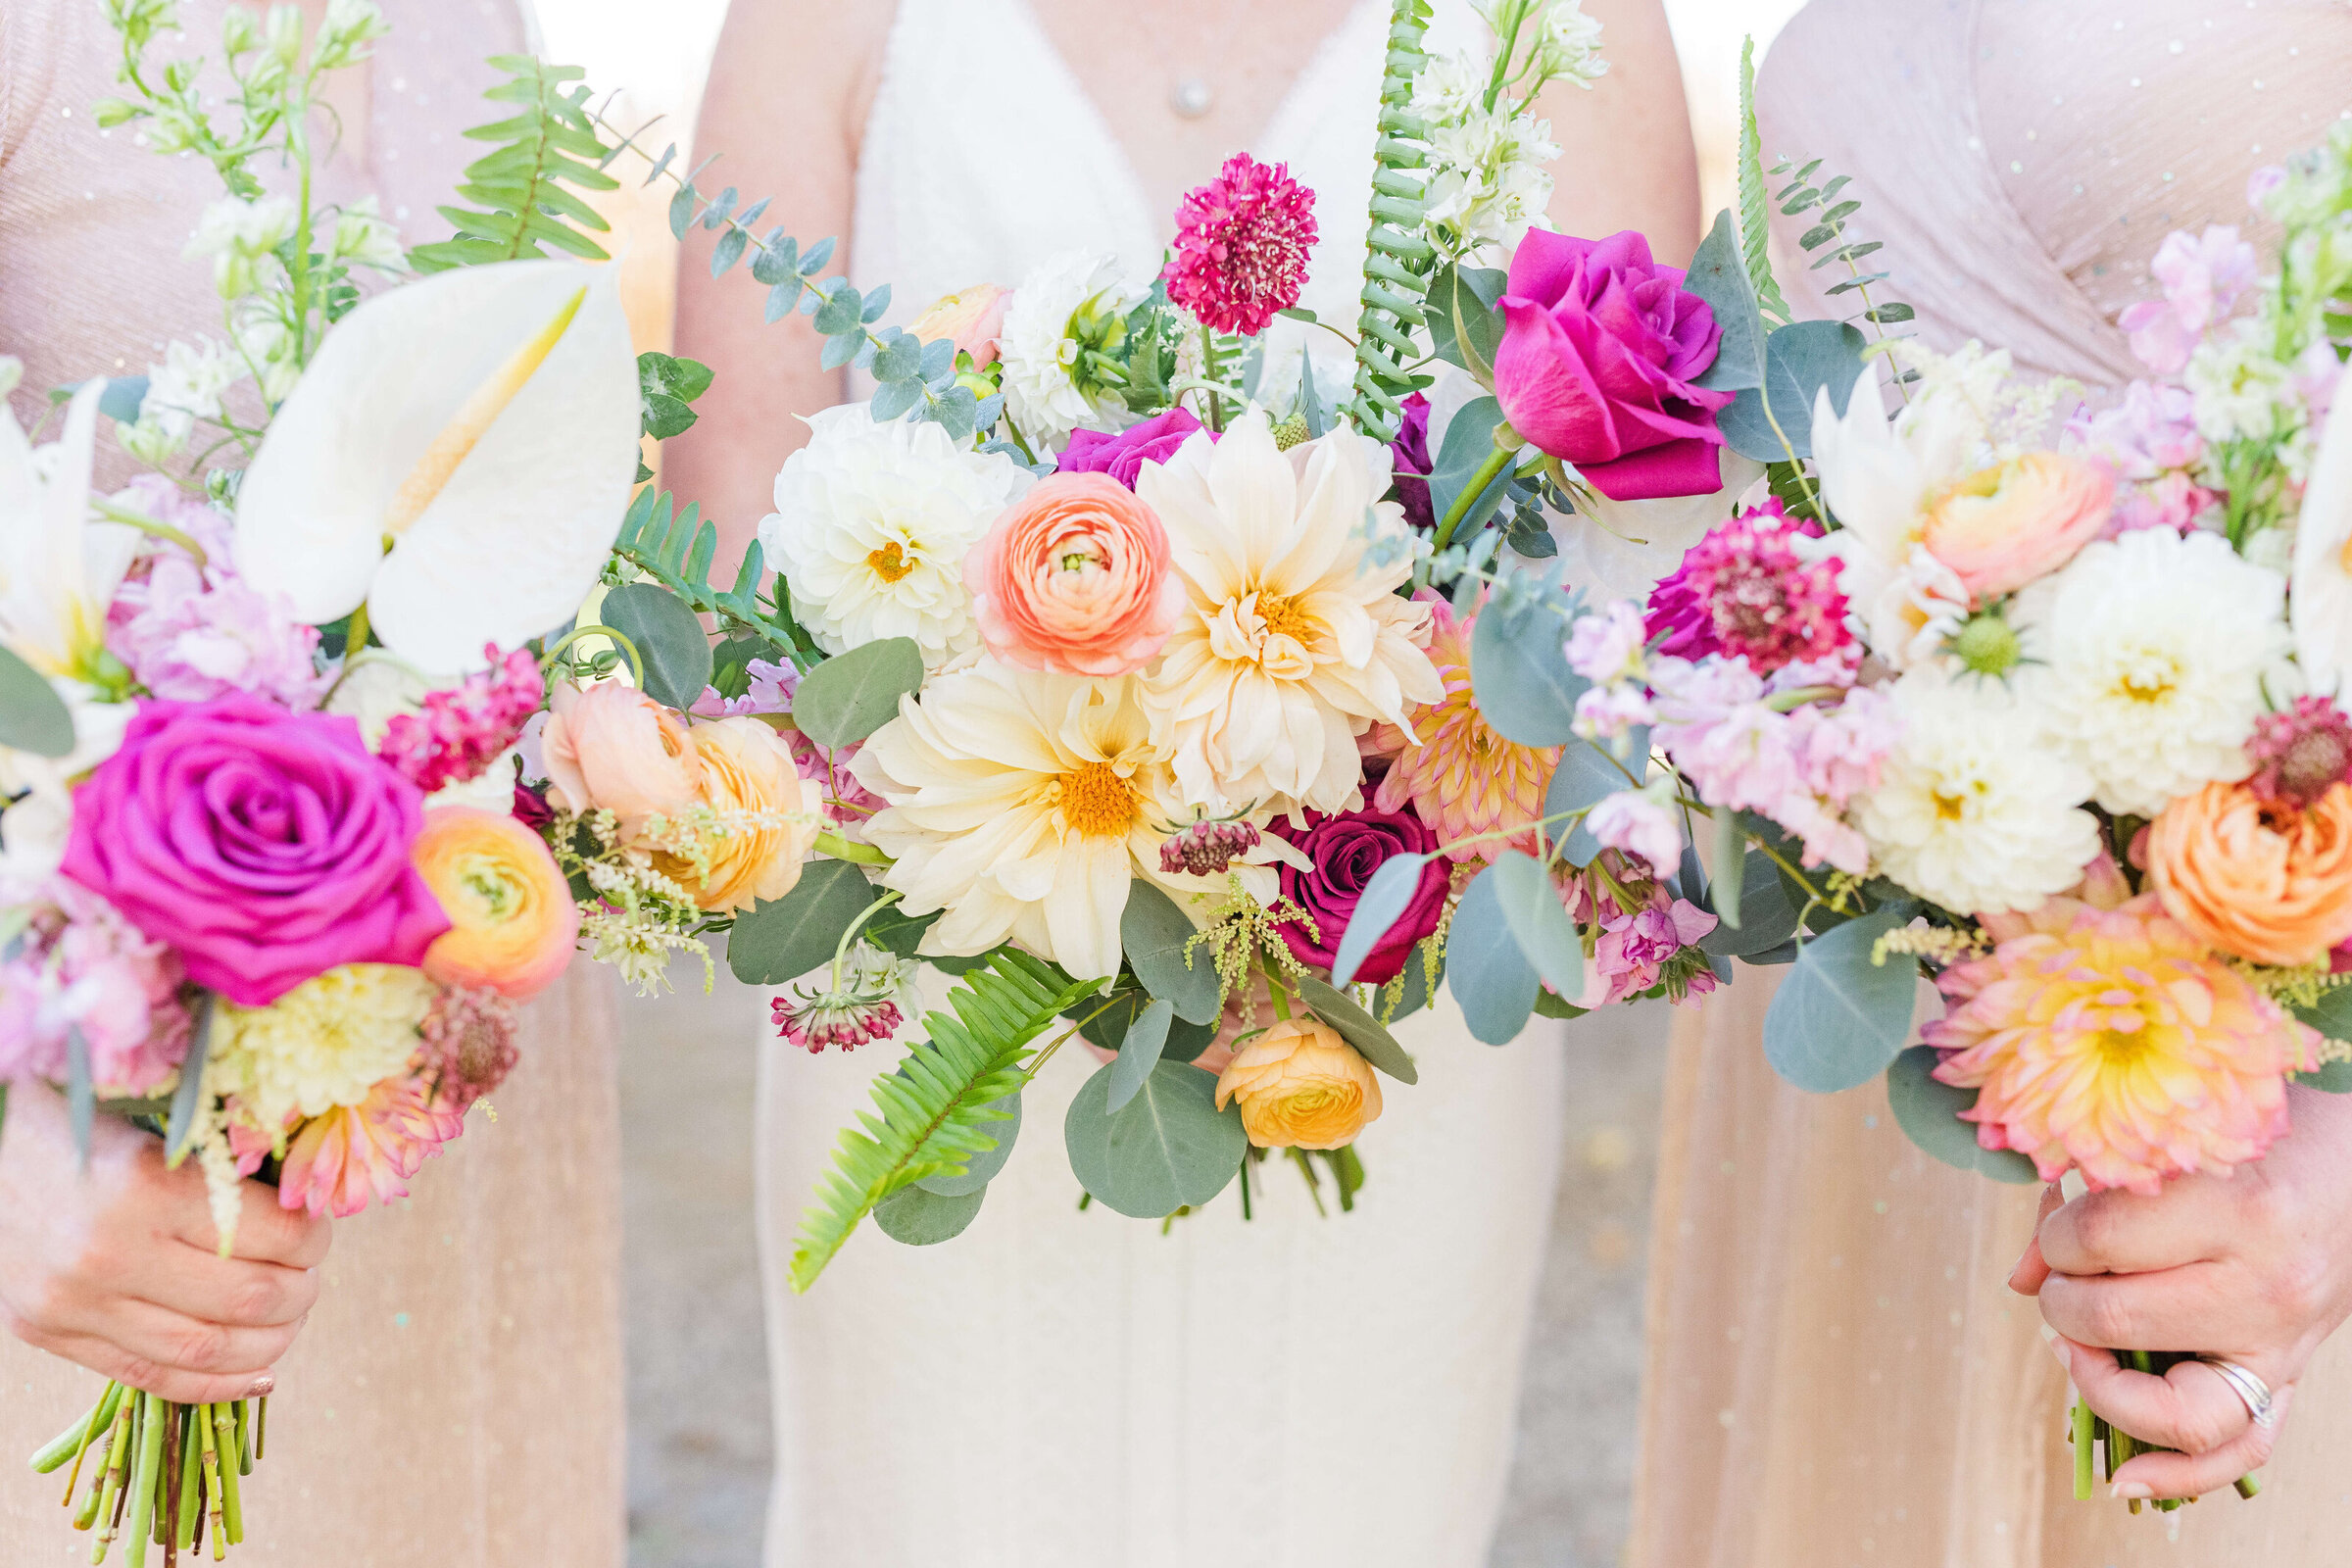 An up close photo of bridesmaids wearing pink holding their bouquets that have white, orange, and pink flowers